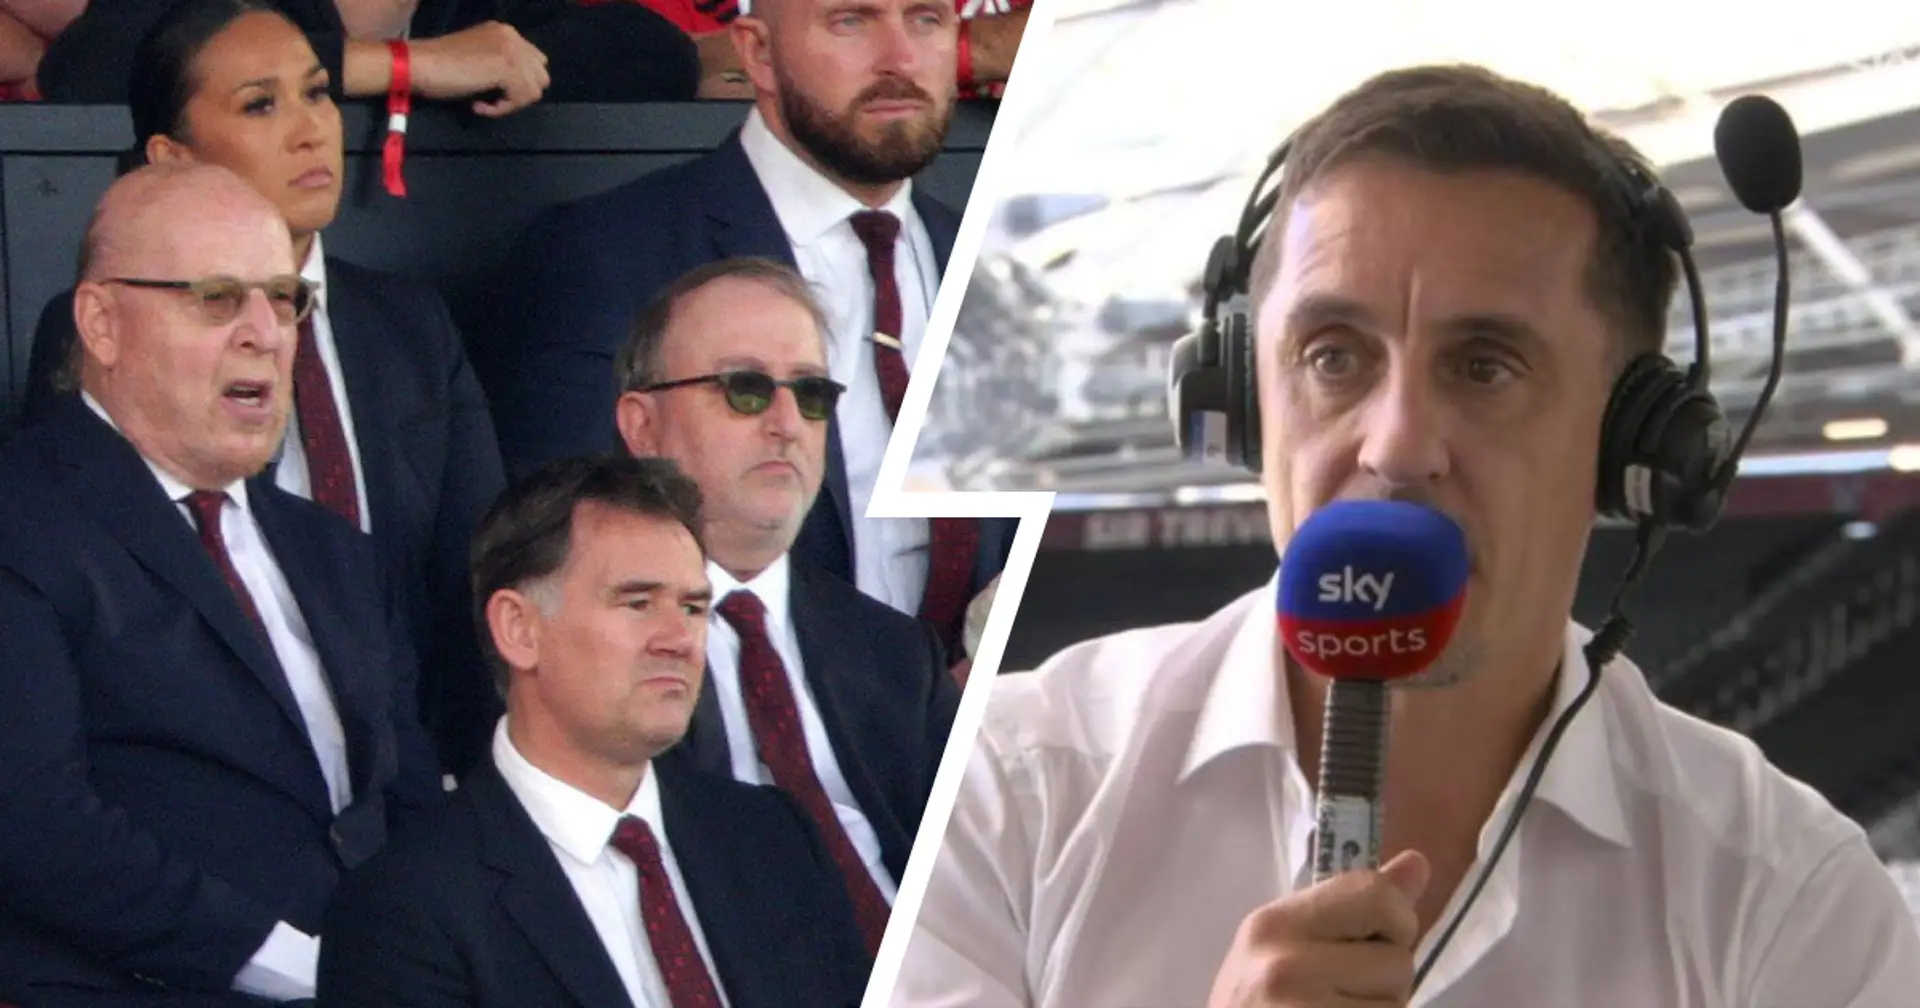 'It's now': Gary Neville renews calls for Glazers to sell Man United